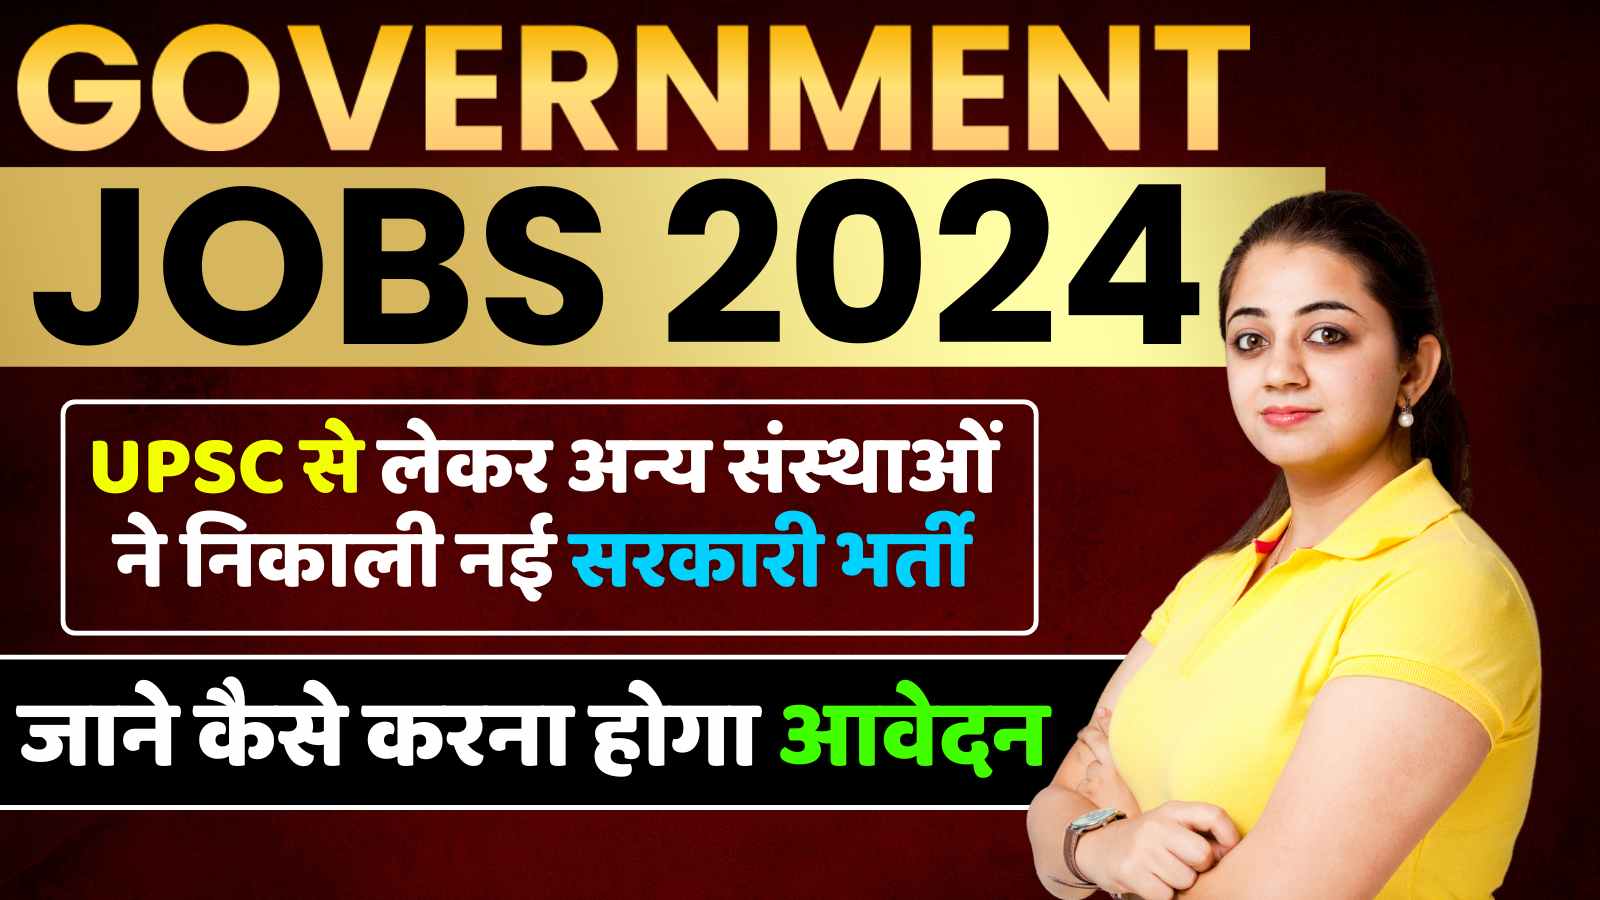 GOVERNMENT JOBS 2024